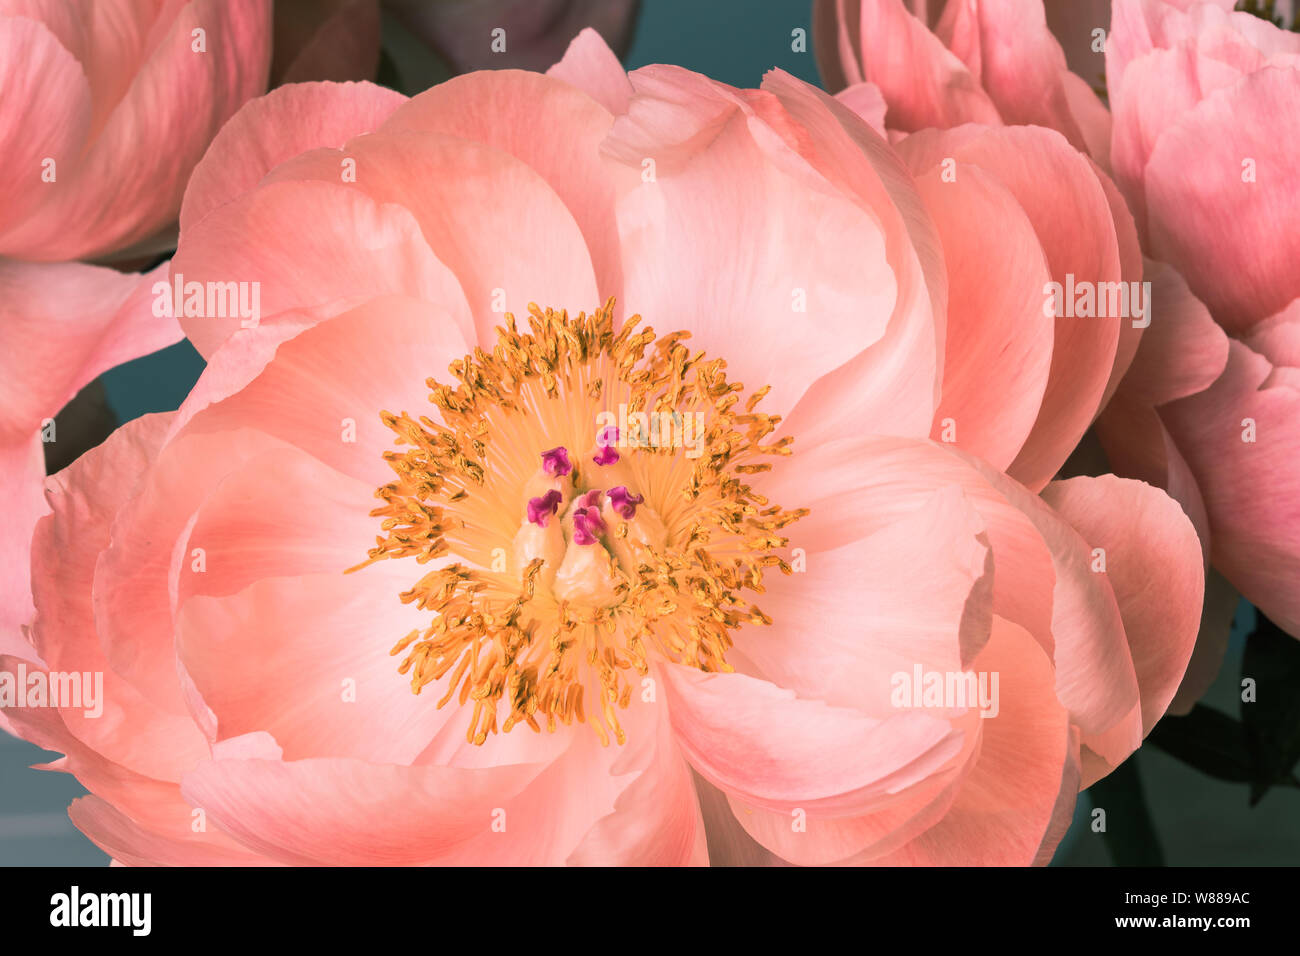 Pink peony flower in bloom with yellow pistils macro still Stock Photo